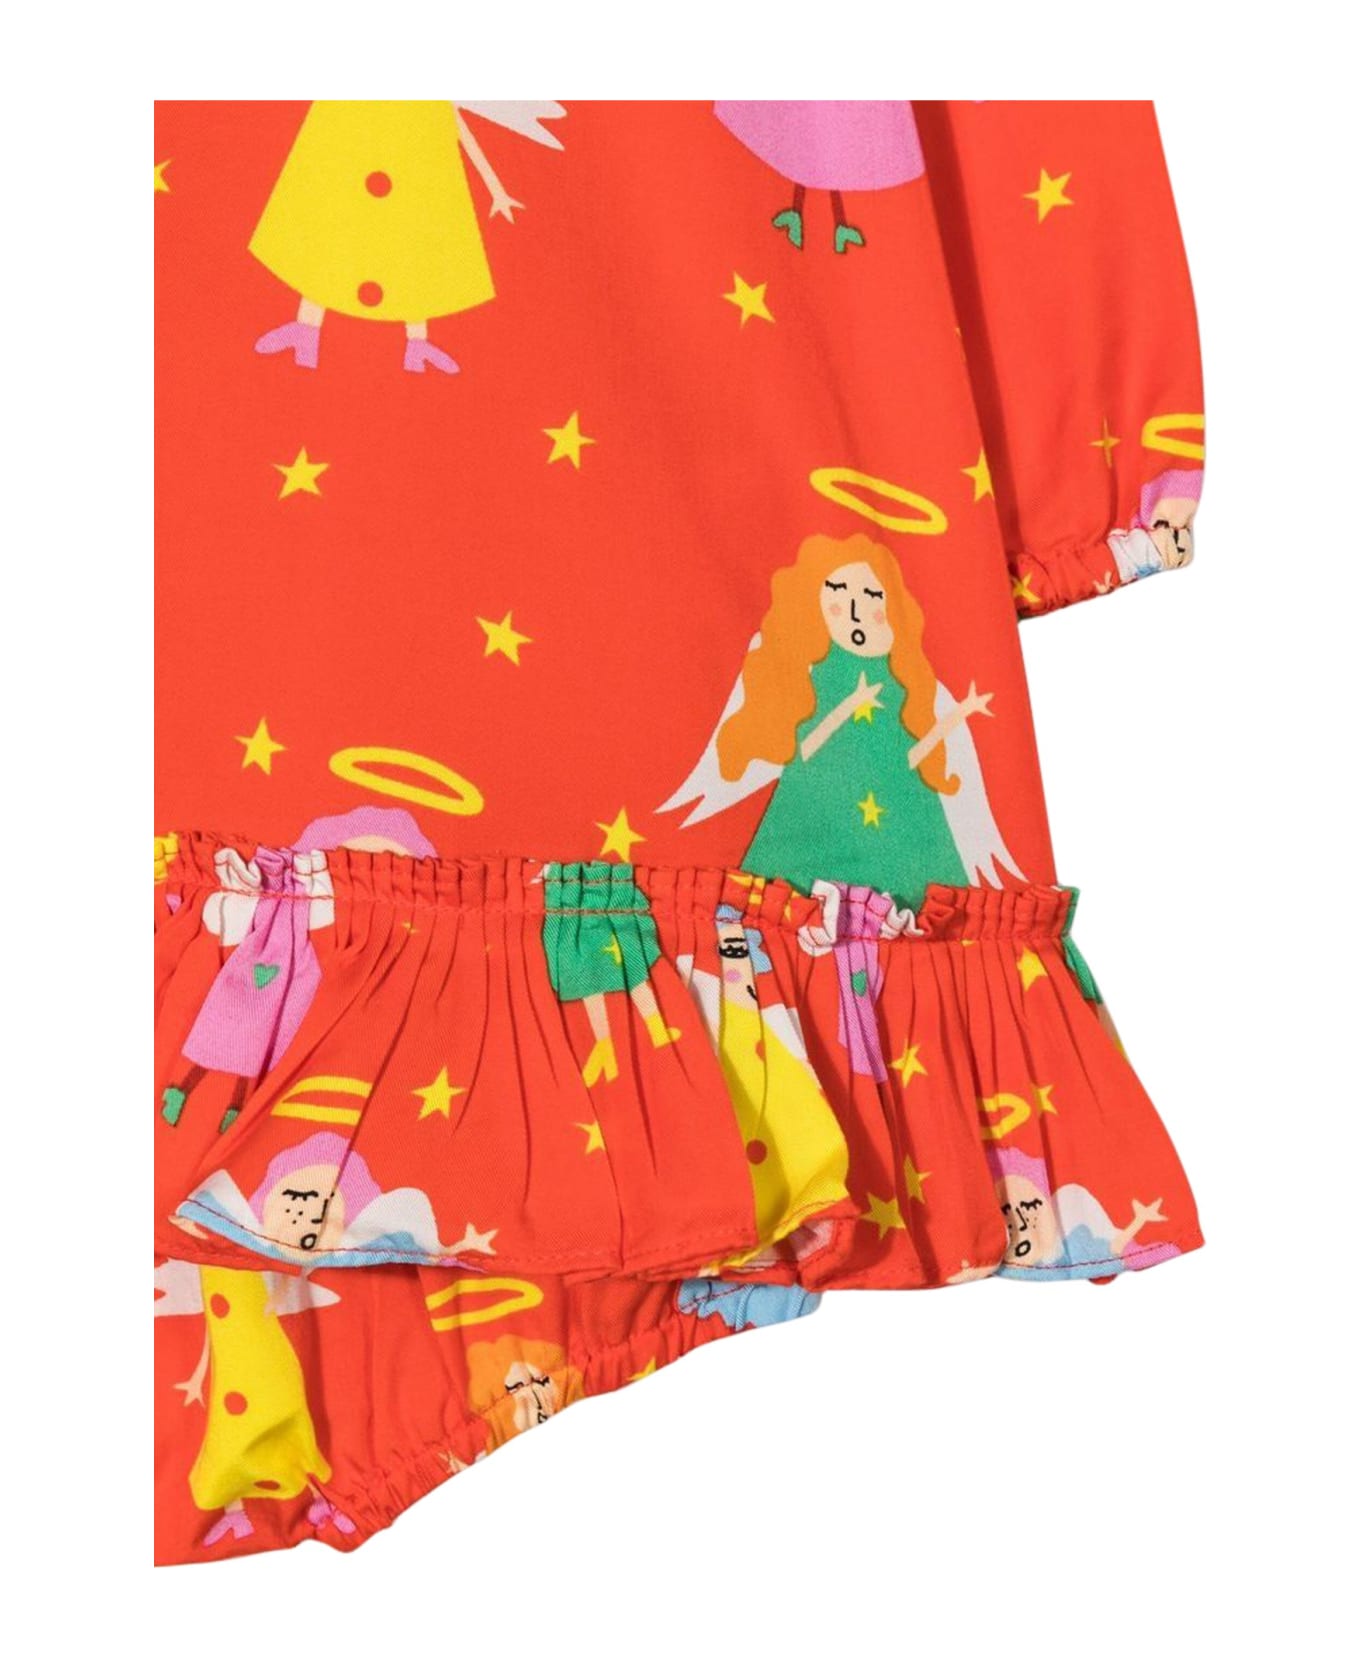 Stella McCartney Kids M/l Dress With Little Angels Coulottes - MULTICOLOR